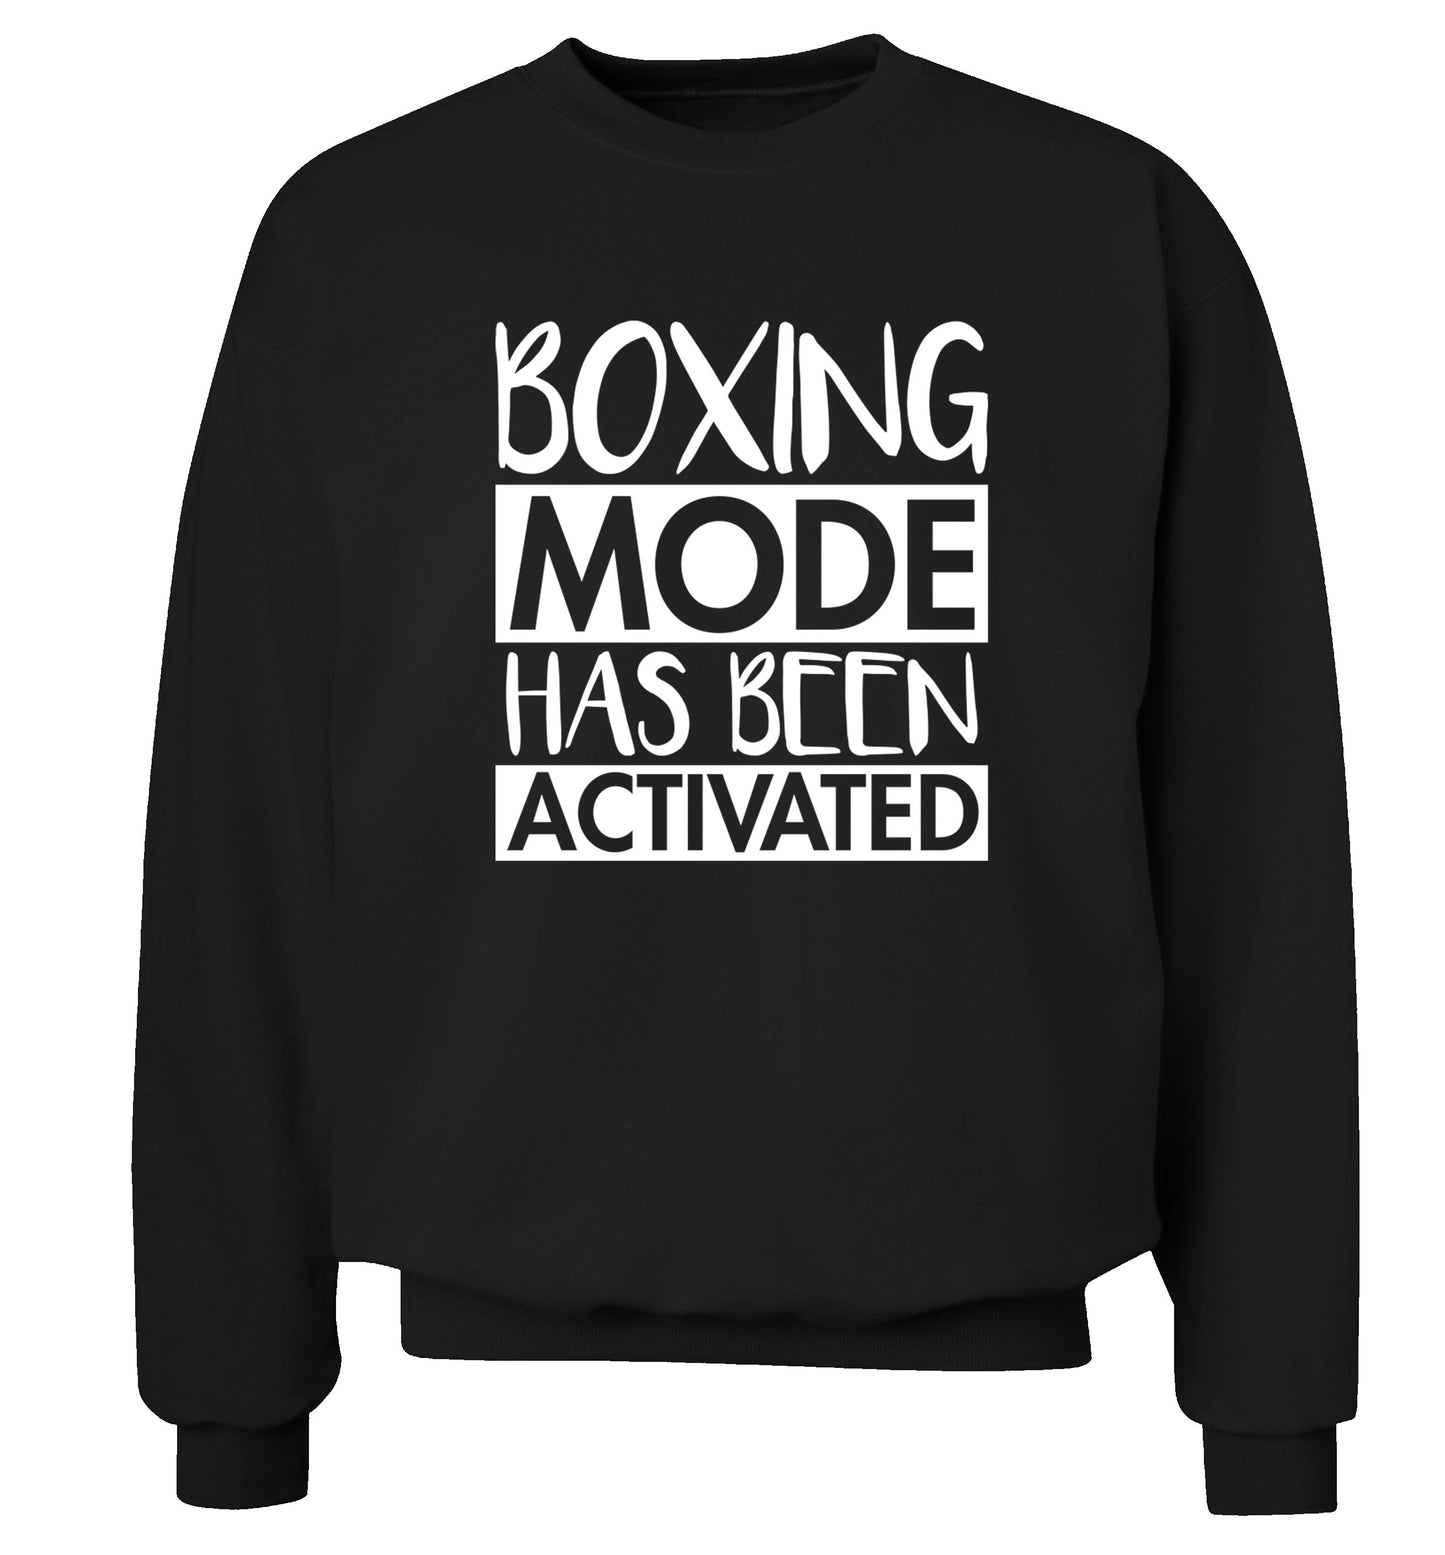 Boxing mode activated Adult's unisex black Sweater 2XL